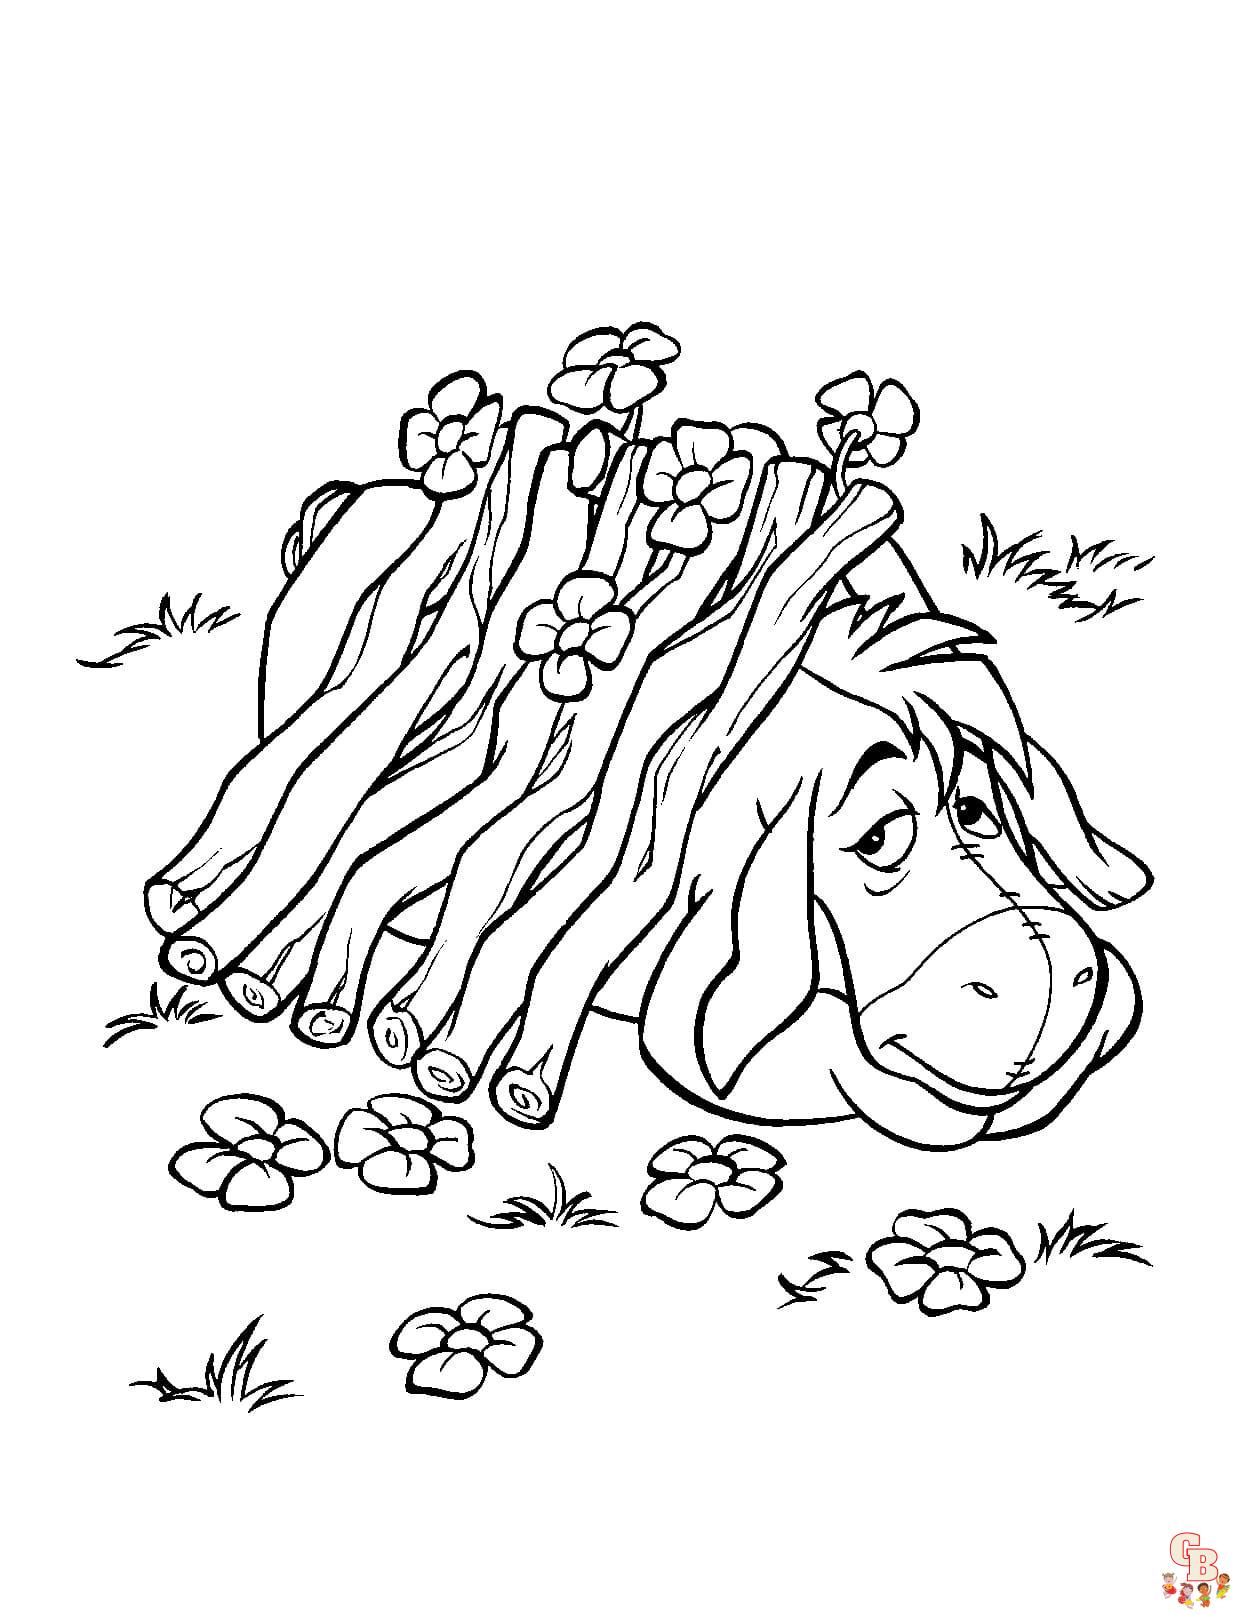 Printable eeyore coloring pages free for kids and adults